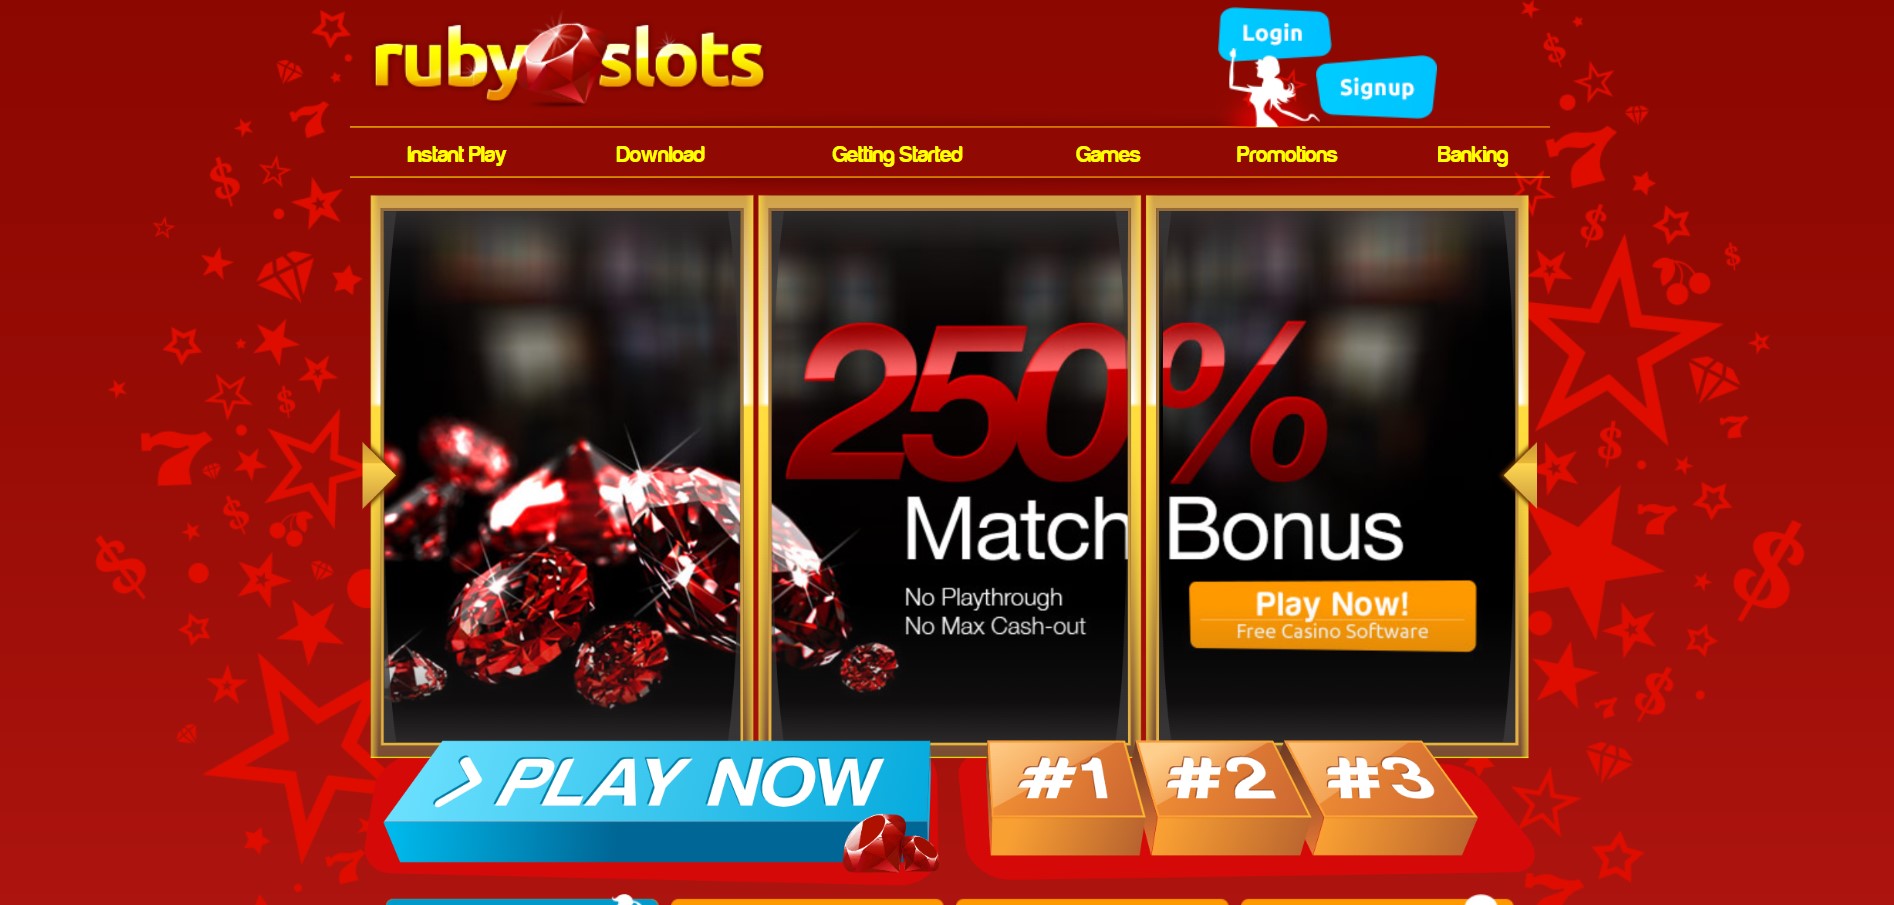 Ruby slots online casino review